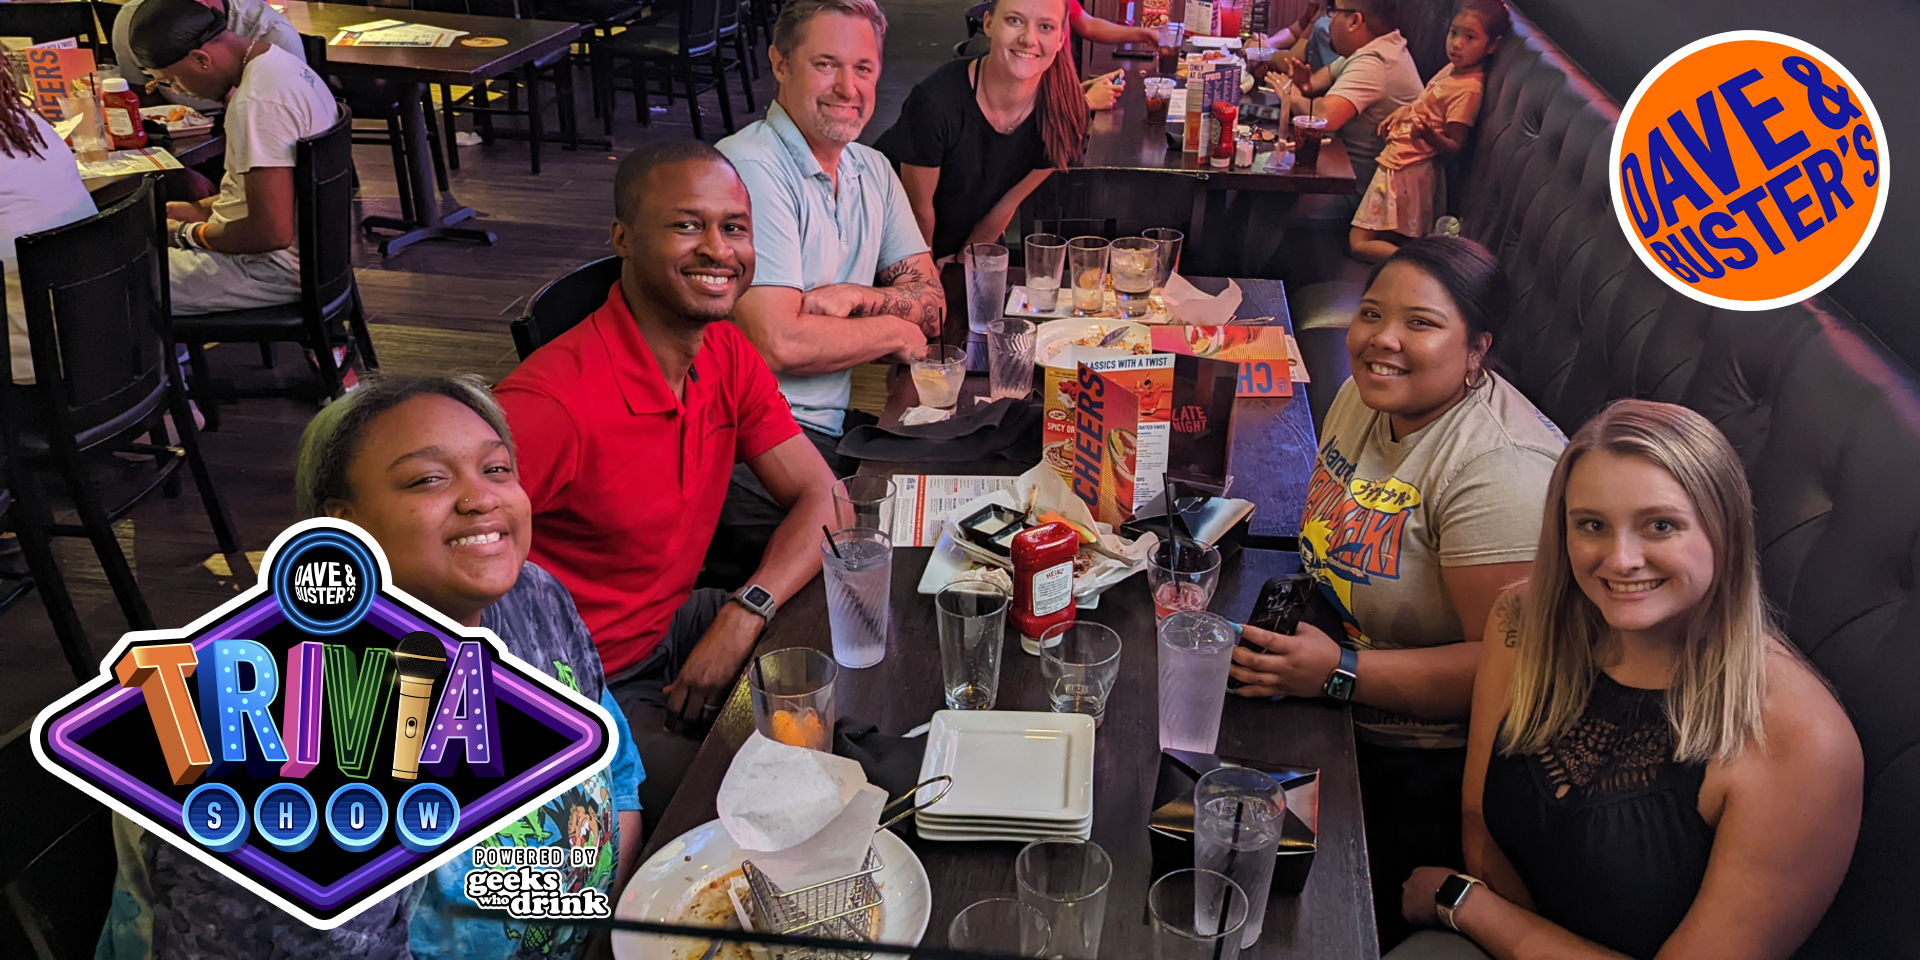 Geeks Who Drink Trivia Night at Dave and Buster's - Irvine promotional image